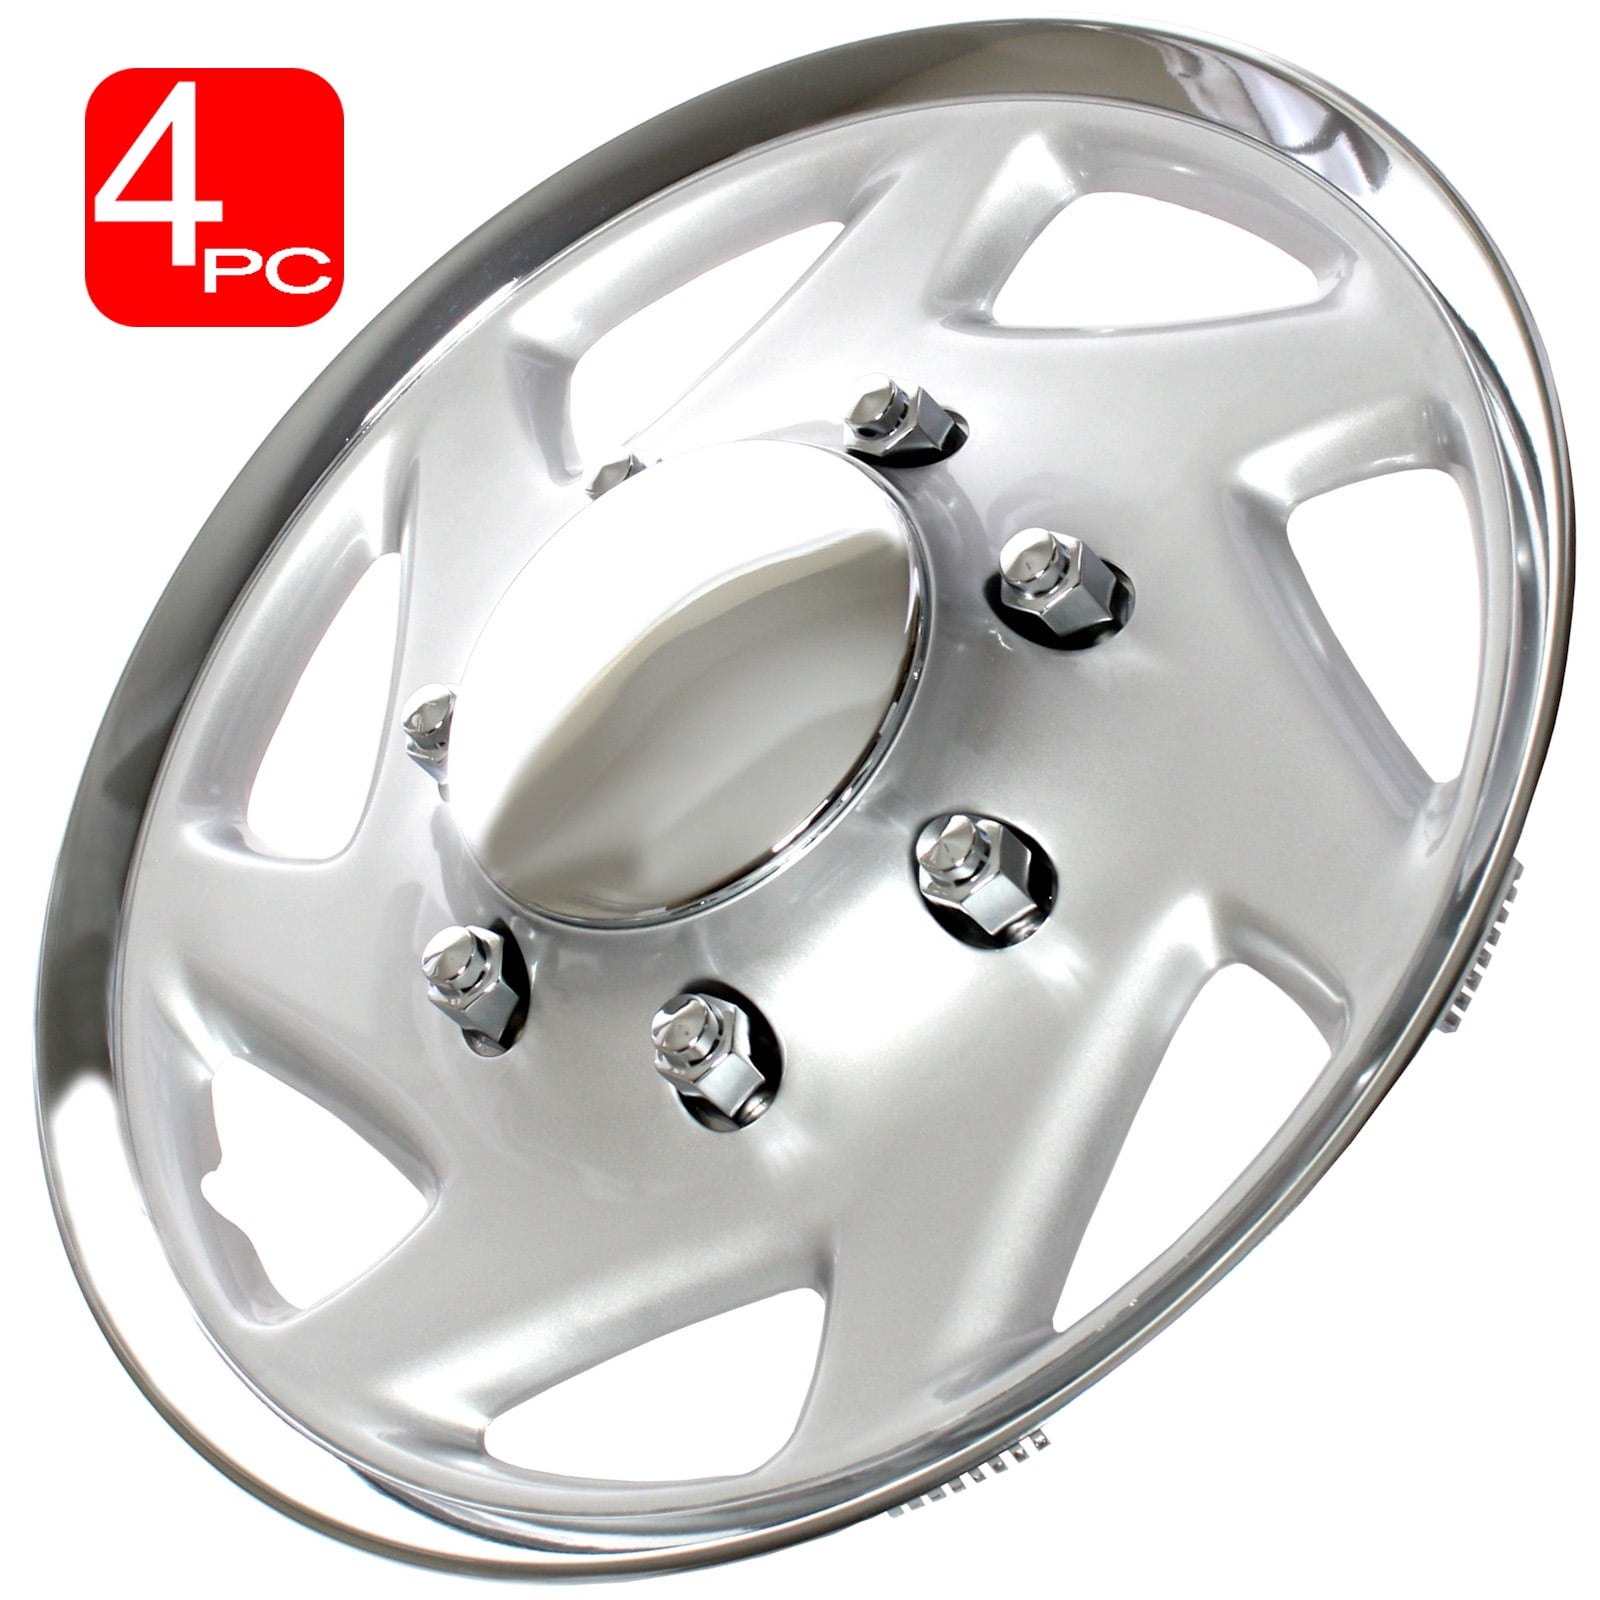 FREE GIFT #D SET OF 4 16" WHEEL TRIMS,RIMS,CAPS TO FIT FORD TRANSIT COURIER 